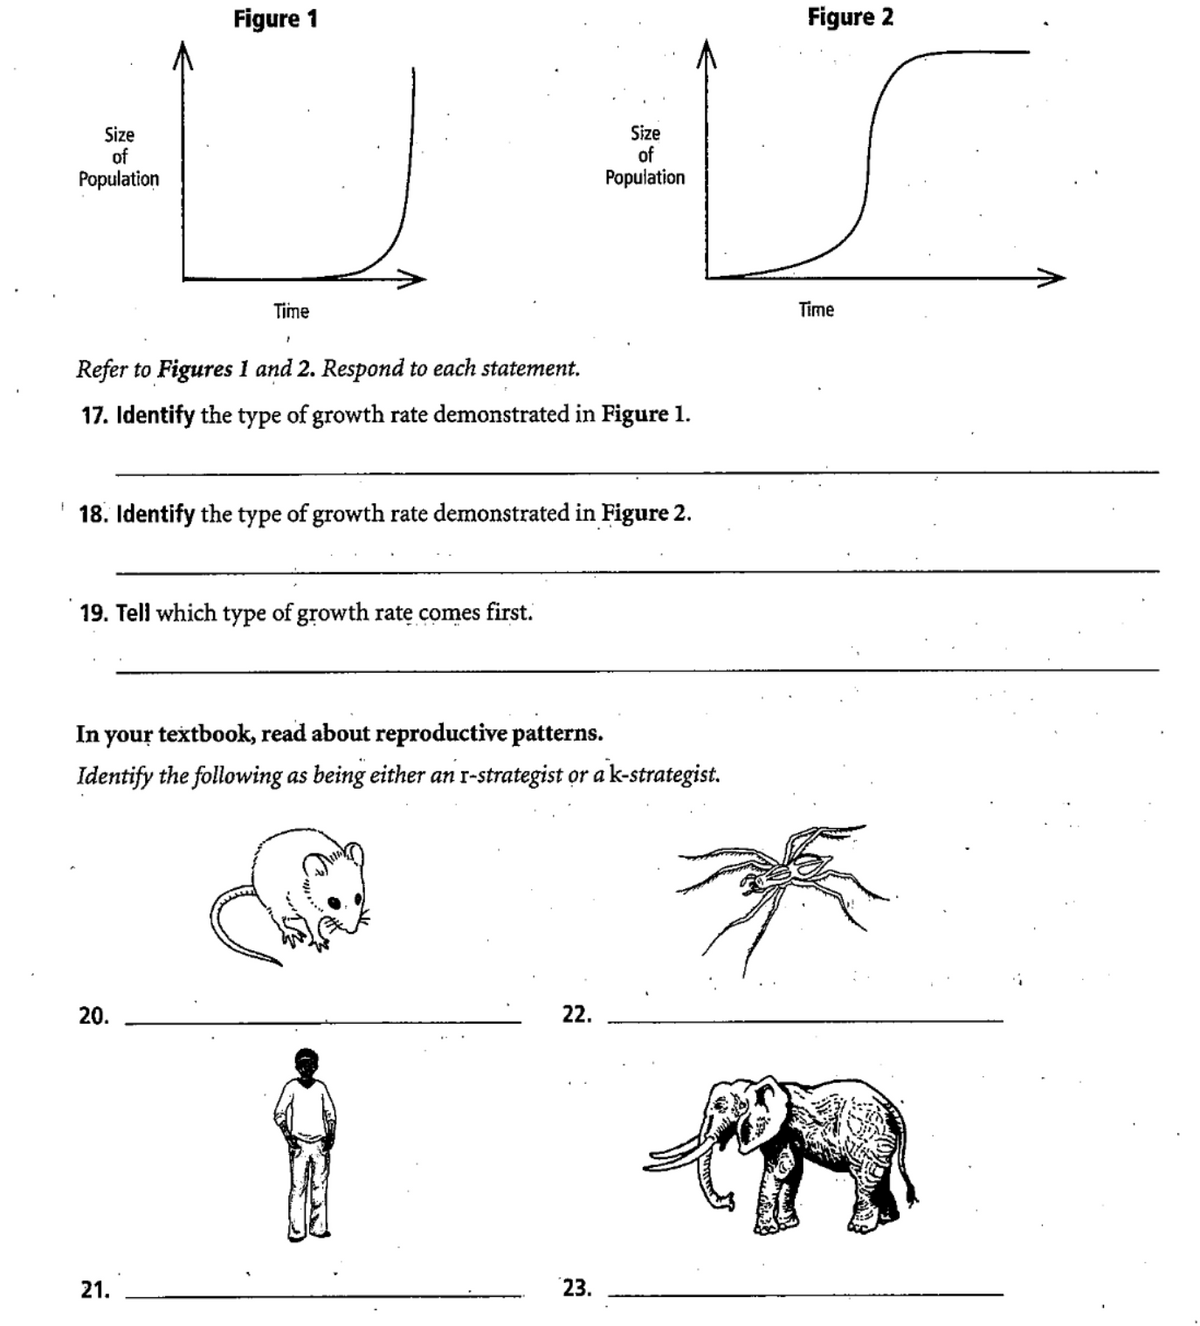 Figure 1
Figure 2
Size
of
Population
Size
of
Population
Time
Time
Refer to Figures 1 and 2. Respond to each statement.
17. Identify the type of growth rate demonstrated in Figure 1.
18. Identify the type of growth rate demonstrated in Figure 2.
19. Tell which type of growth ratę comes first.
In your textbook, read about reproductive patterns.
Identify the following as being either an r-strategist or a k-strategist.
- an:
20.
22.
21.
23.
